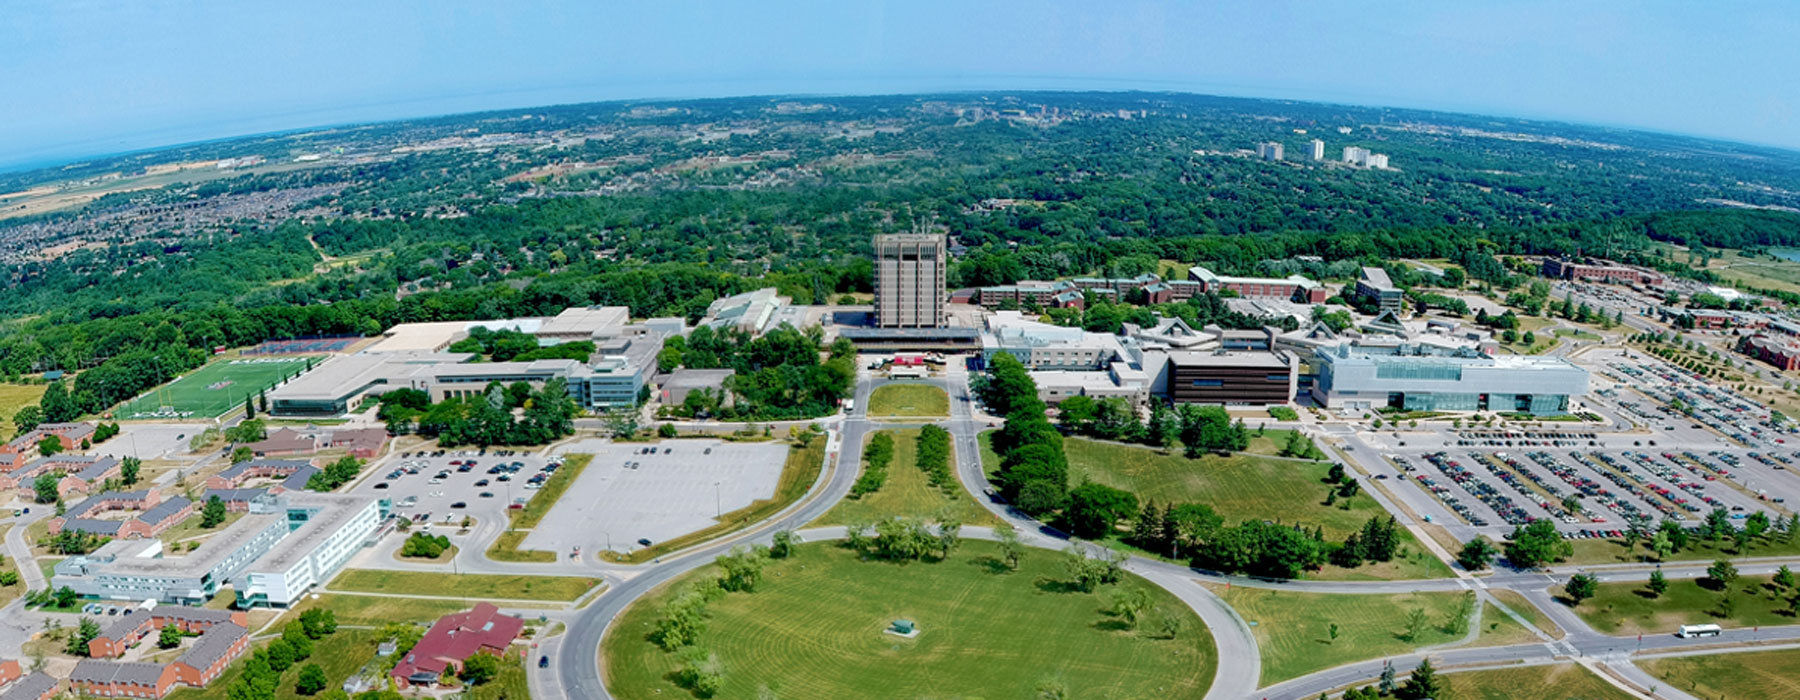 An aerial view of Brock's campus. The green lawn of the entrance is in the foreground, leading to Schmon tower in the midground and horizon, with a clear blue sky. 